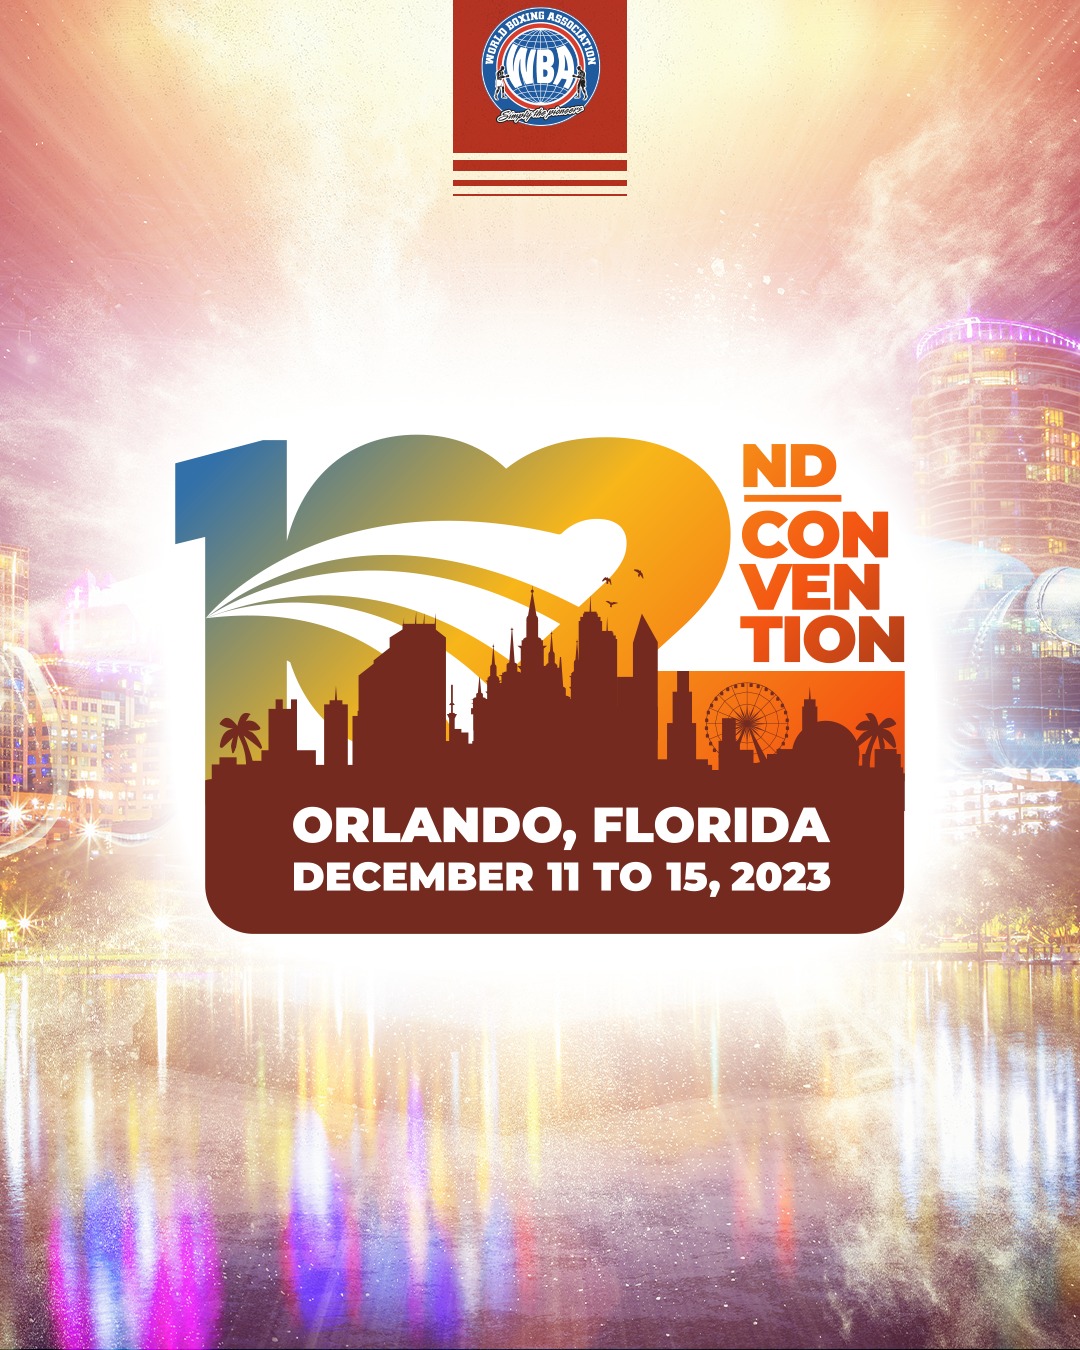 WBA Convention week: Orlando is the epicenter of boxing